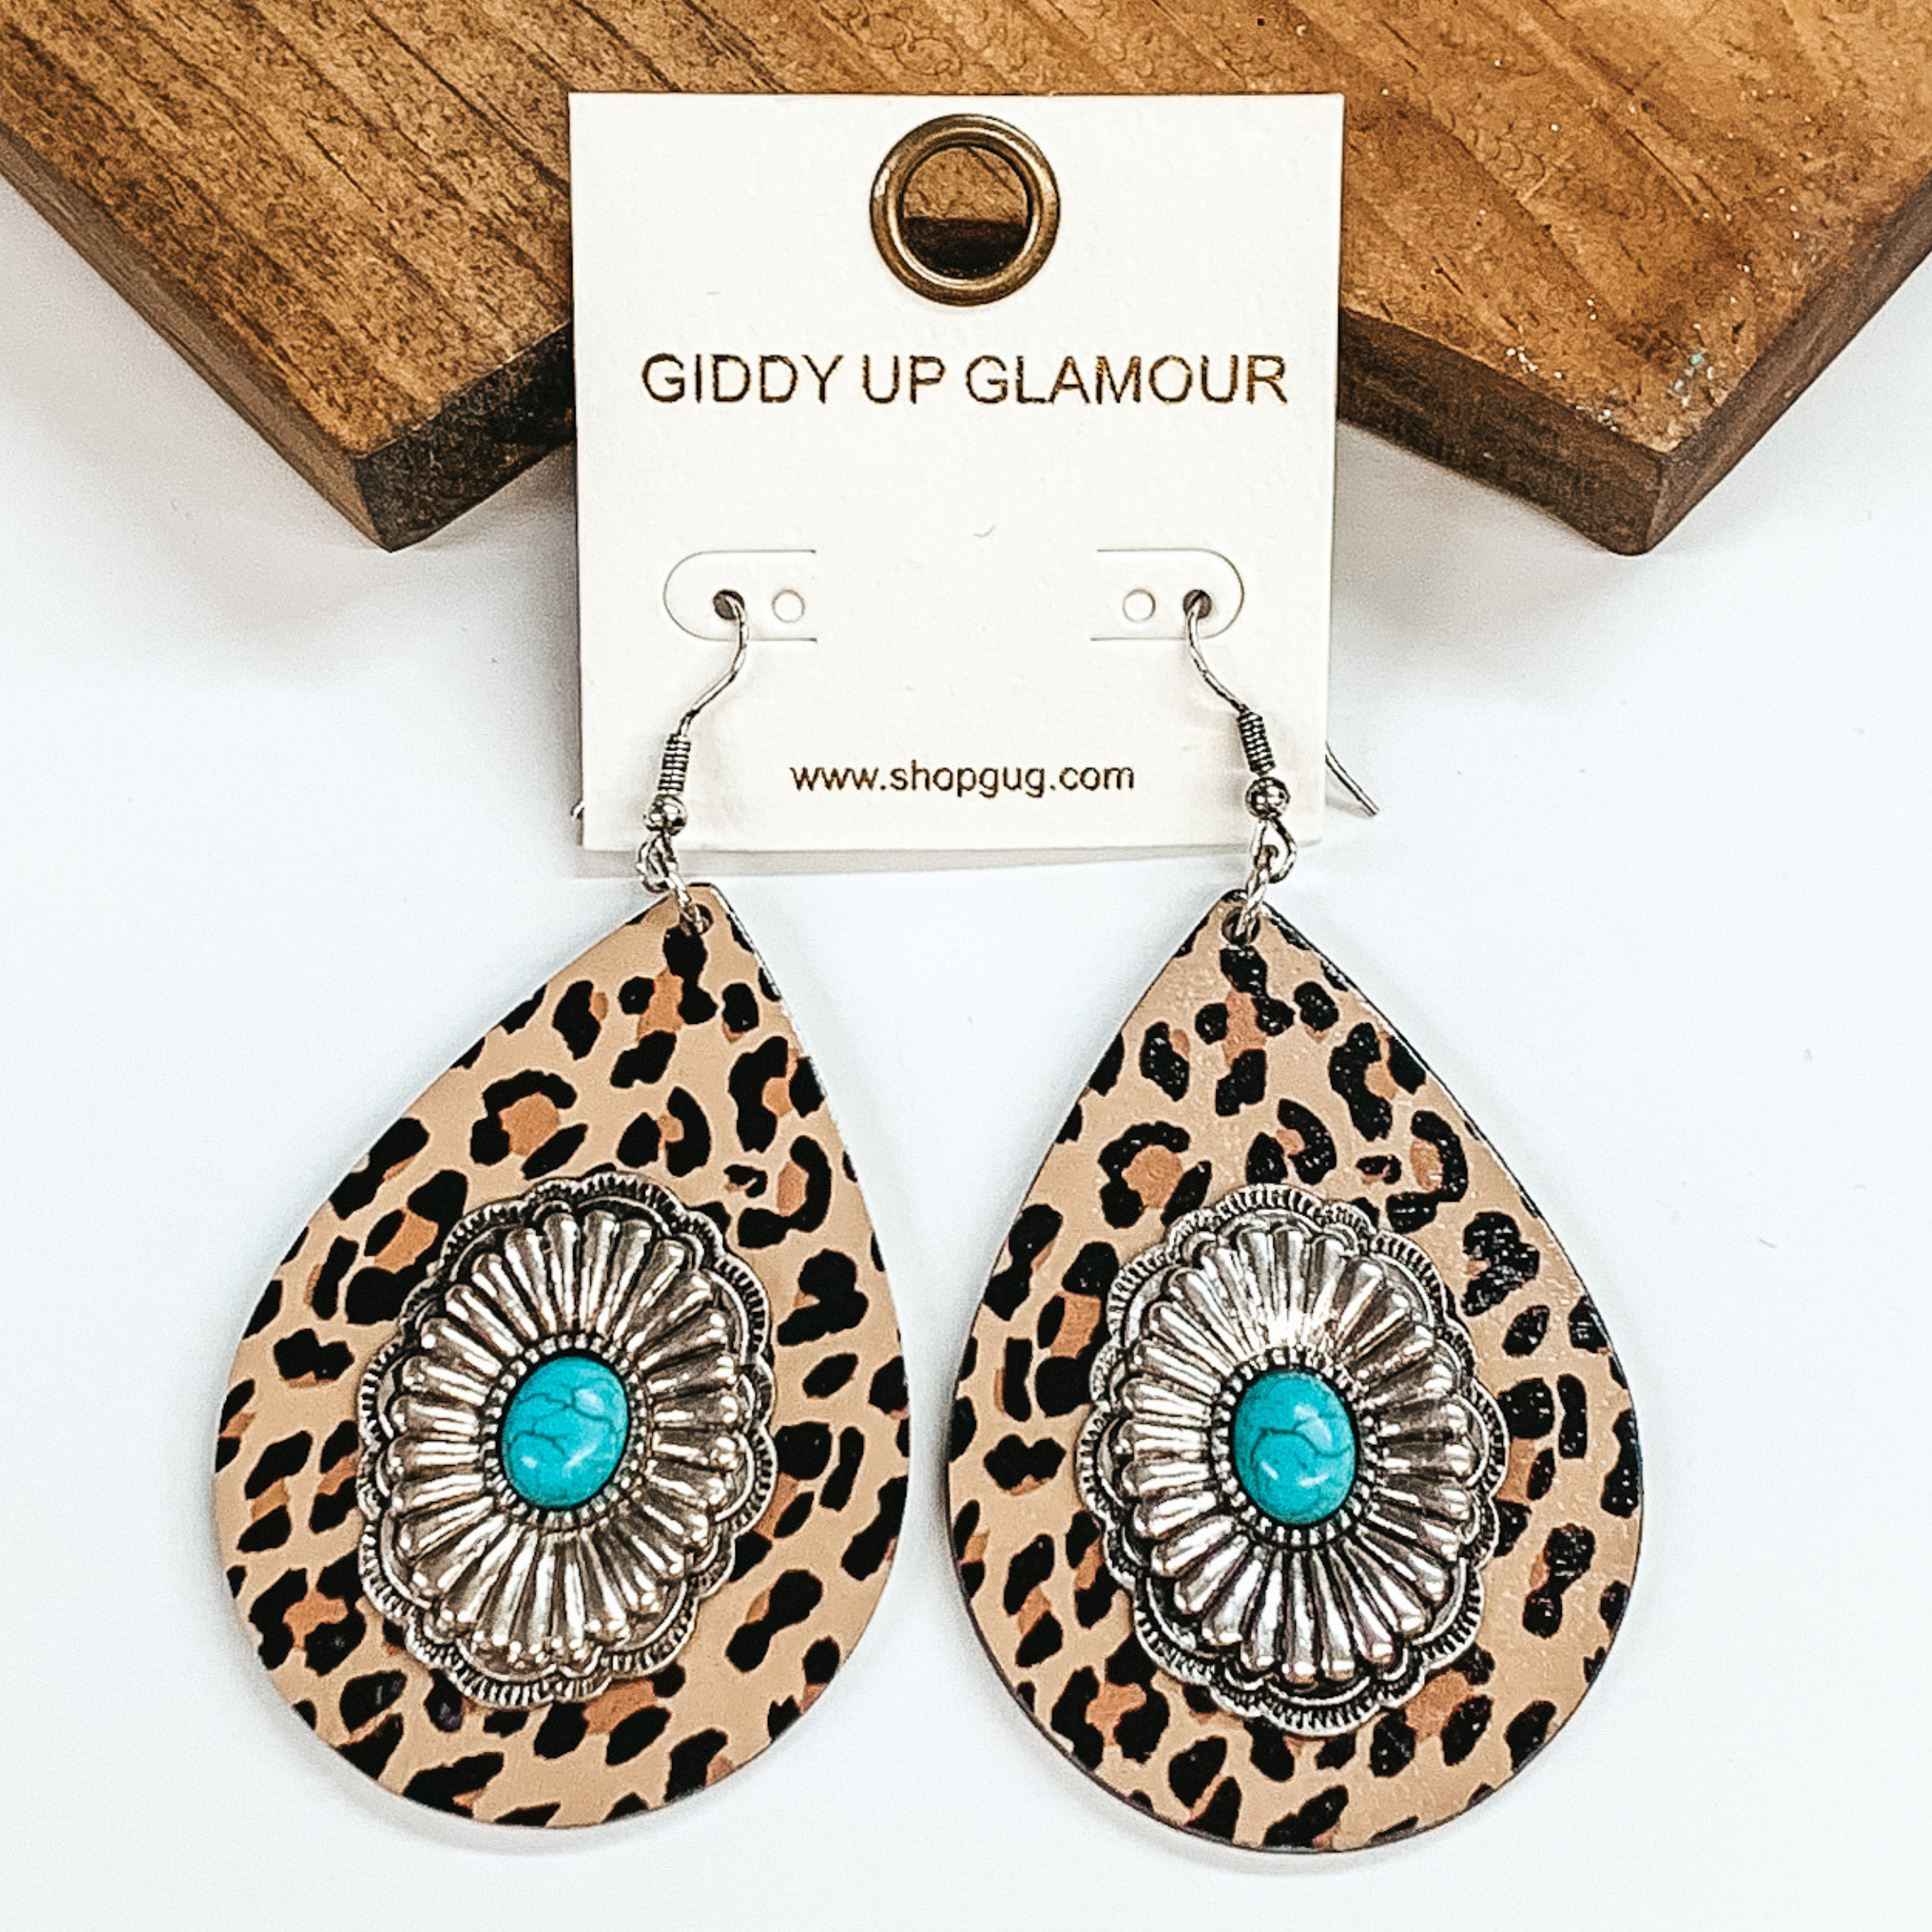 Teardrop earrings in brown cheetah print with silver conchos and turquoise stones in the center. Pictured on a white background and brown block.